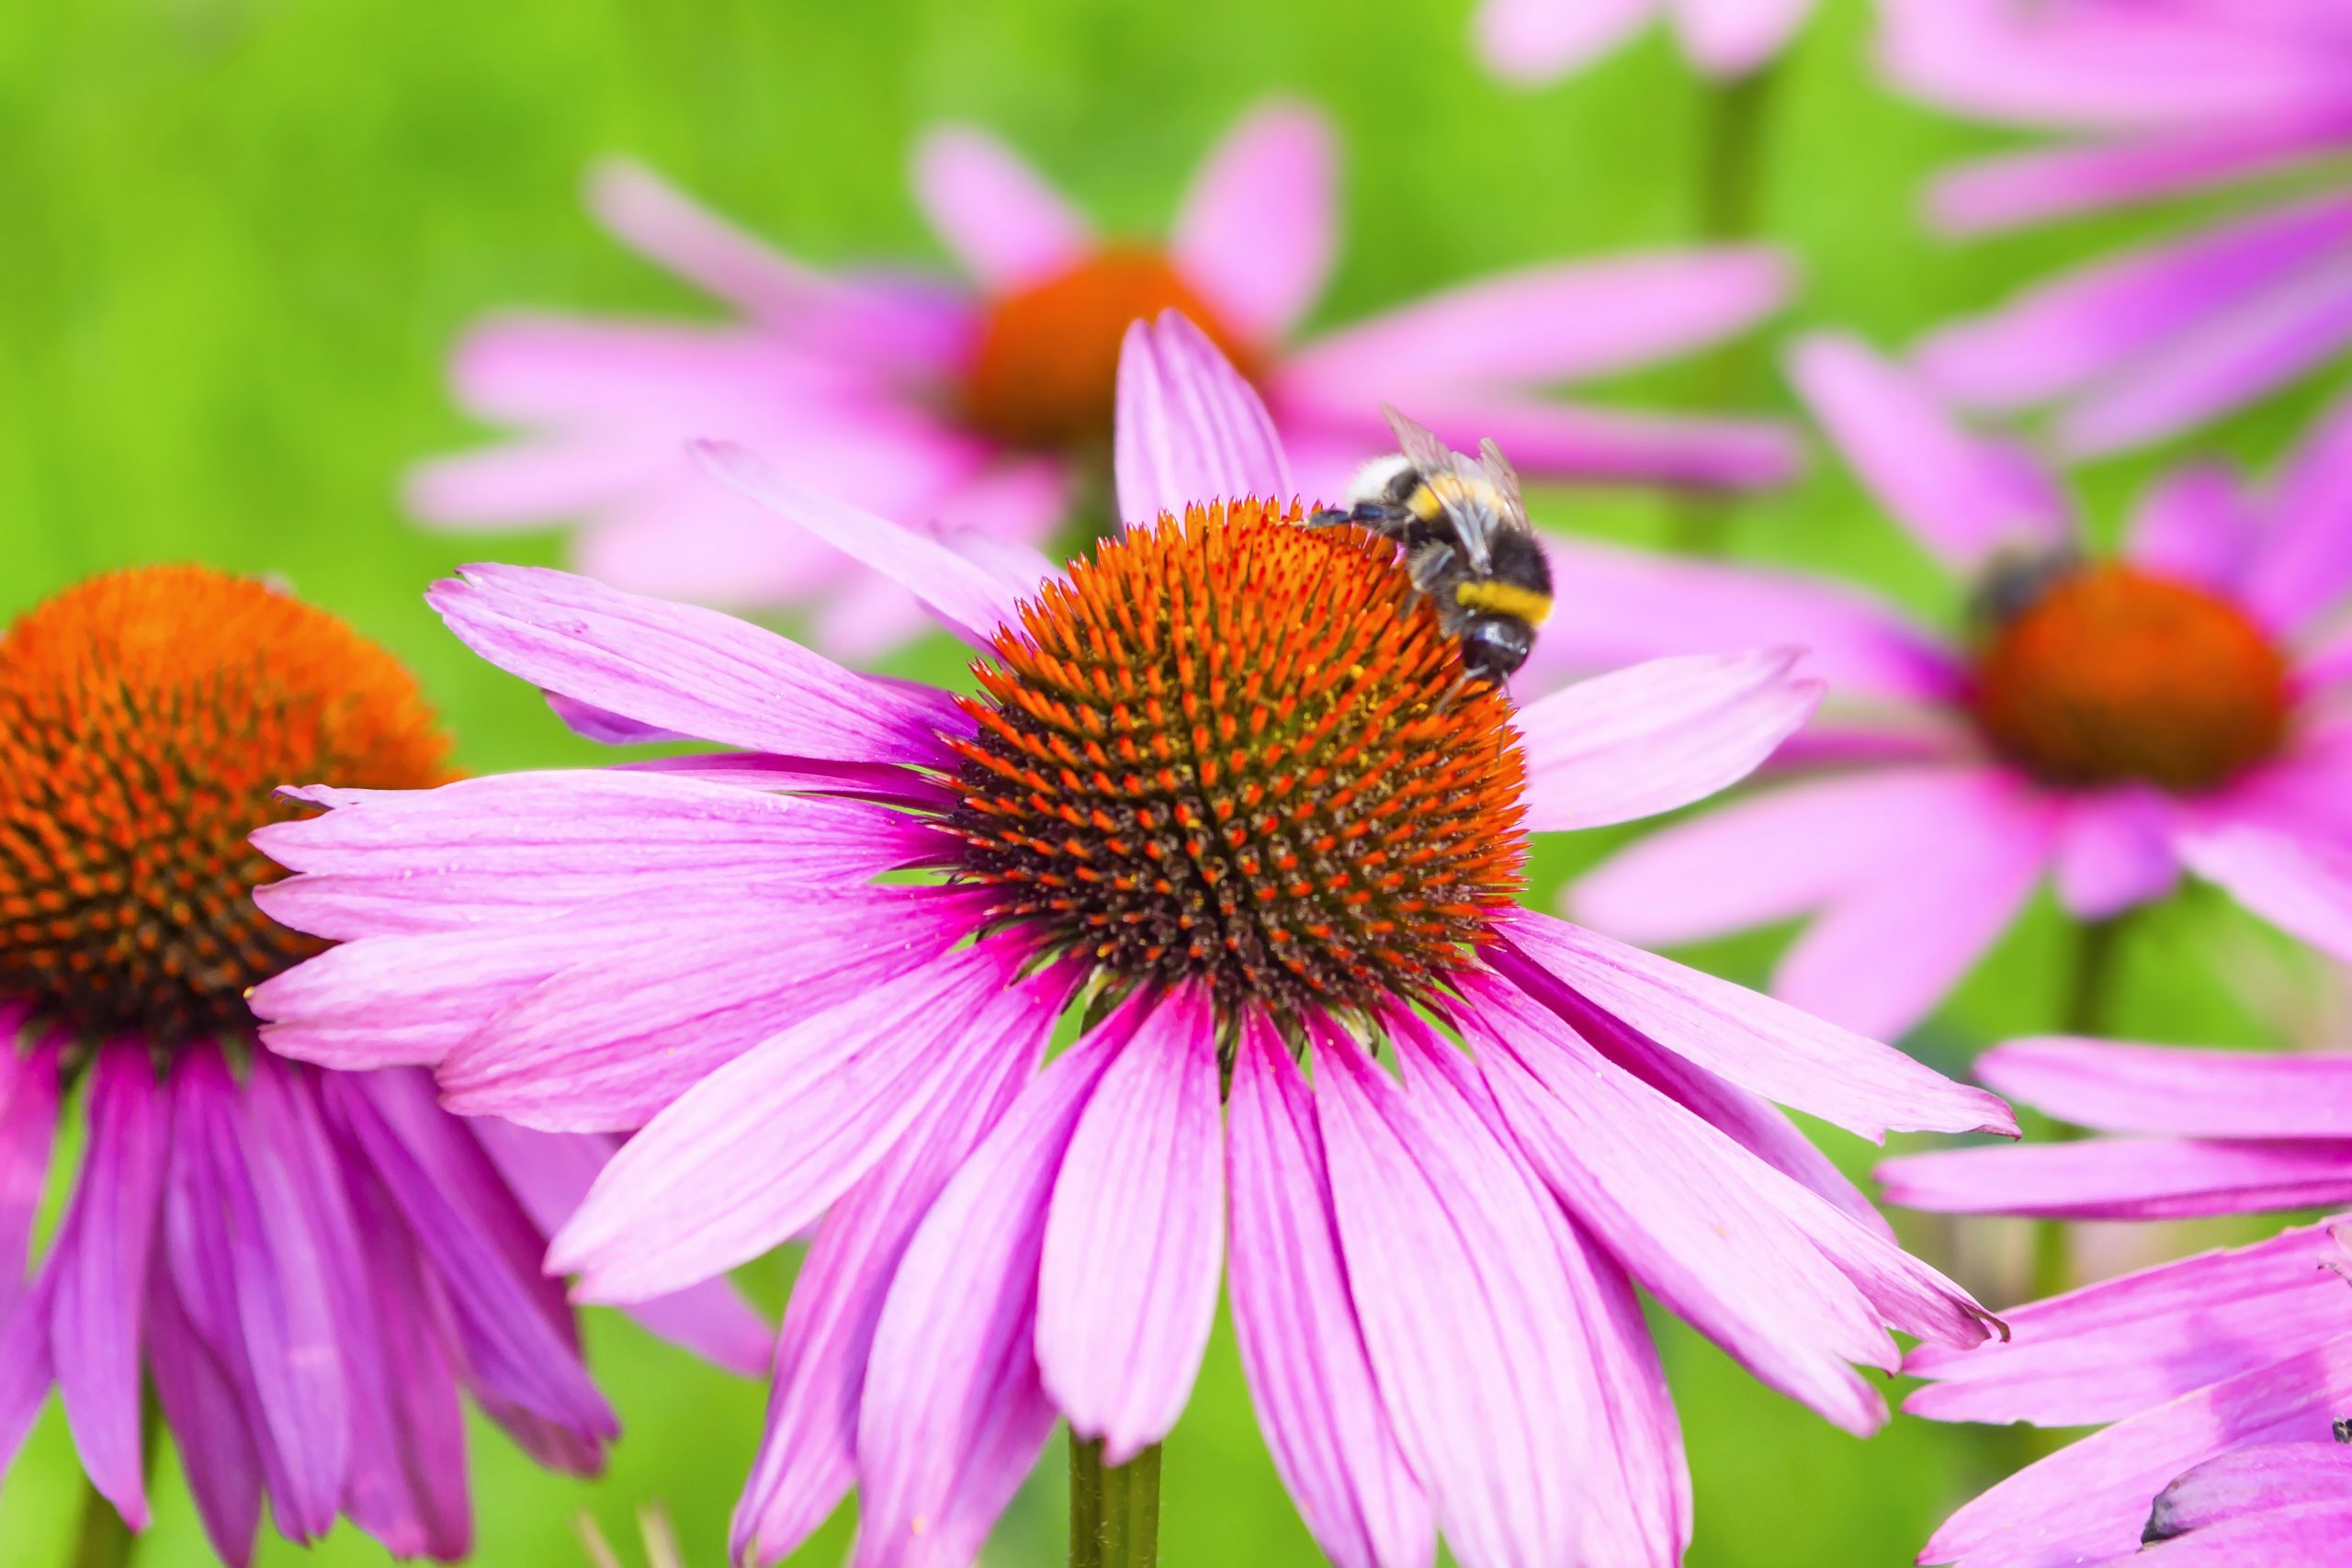 Coneflower 101: Care Tips, New Varieties and More